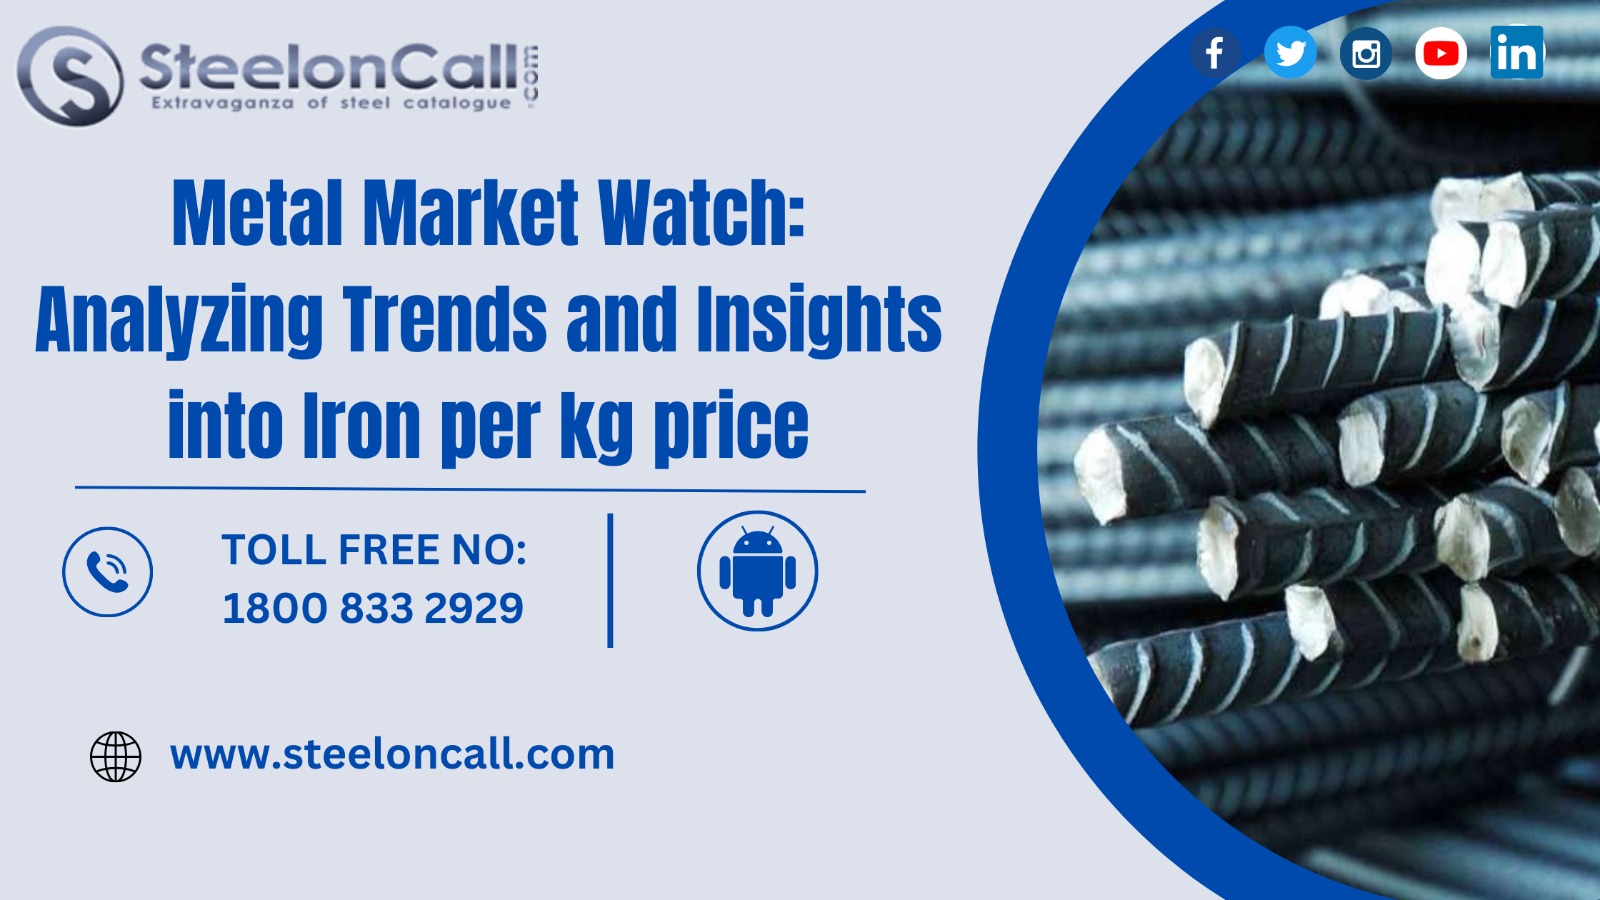 Metal Market Watch: Analyzing Trends and Insights into Iron per kg price